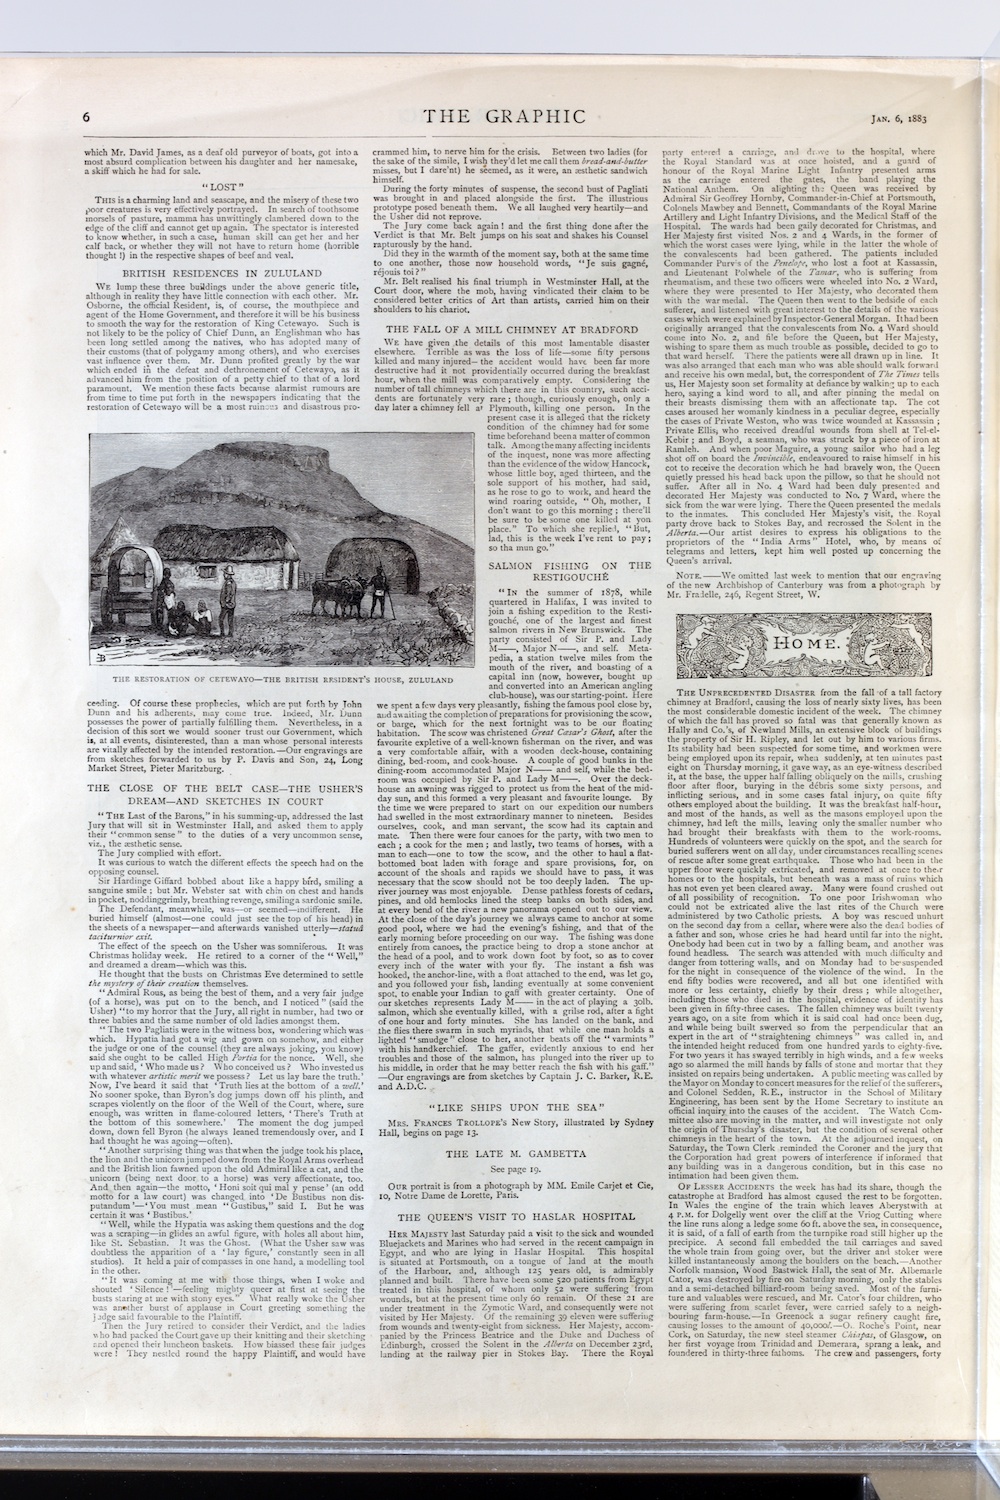 The Graphic, Jan. 6, 1883
